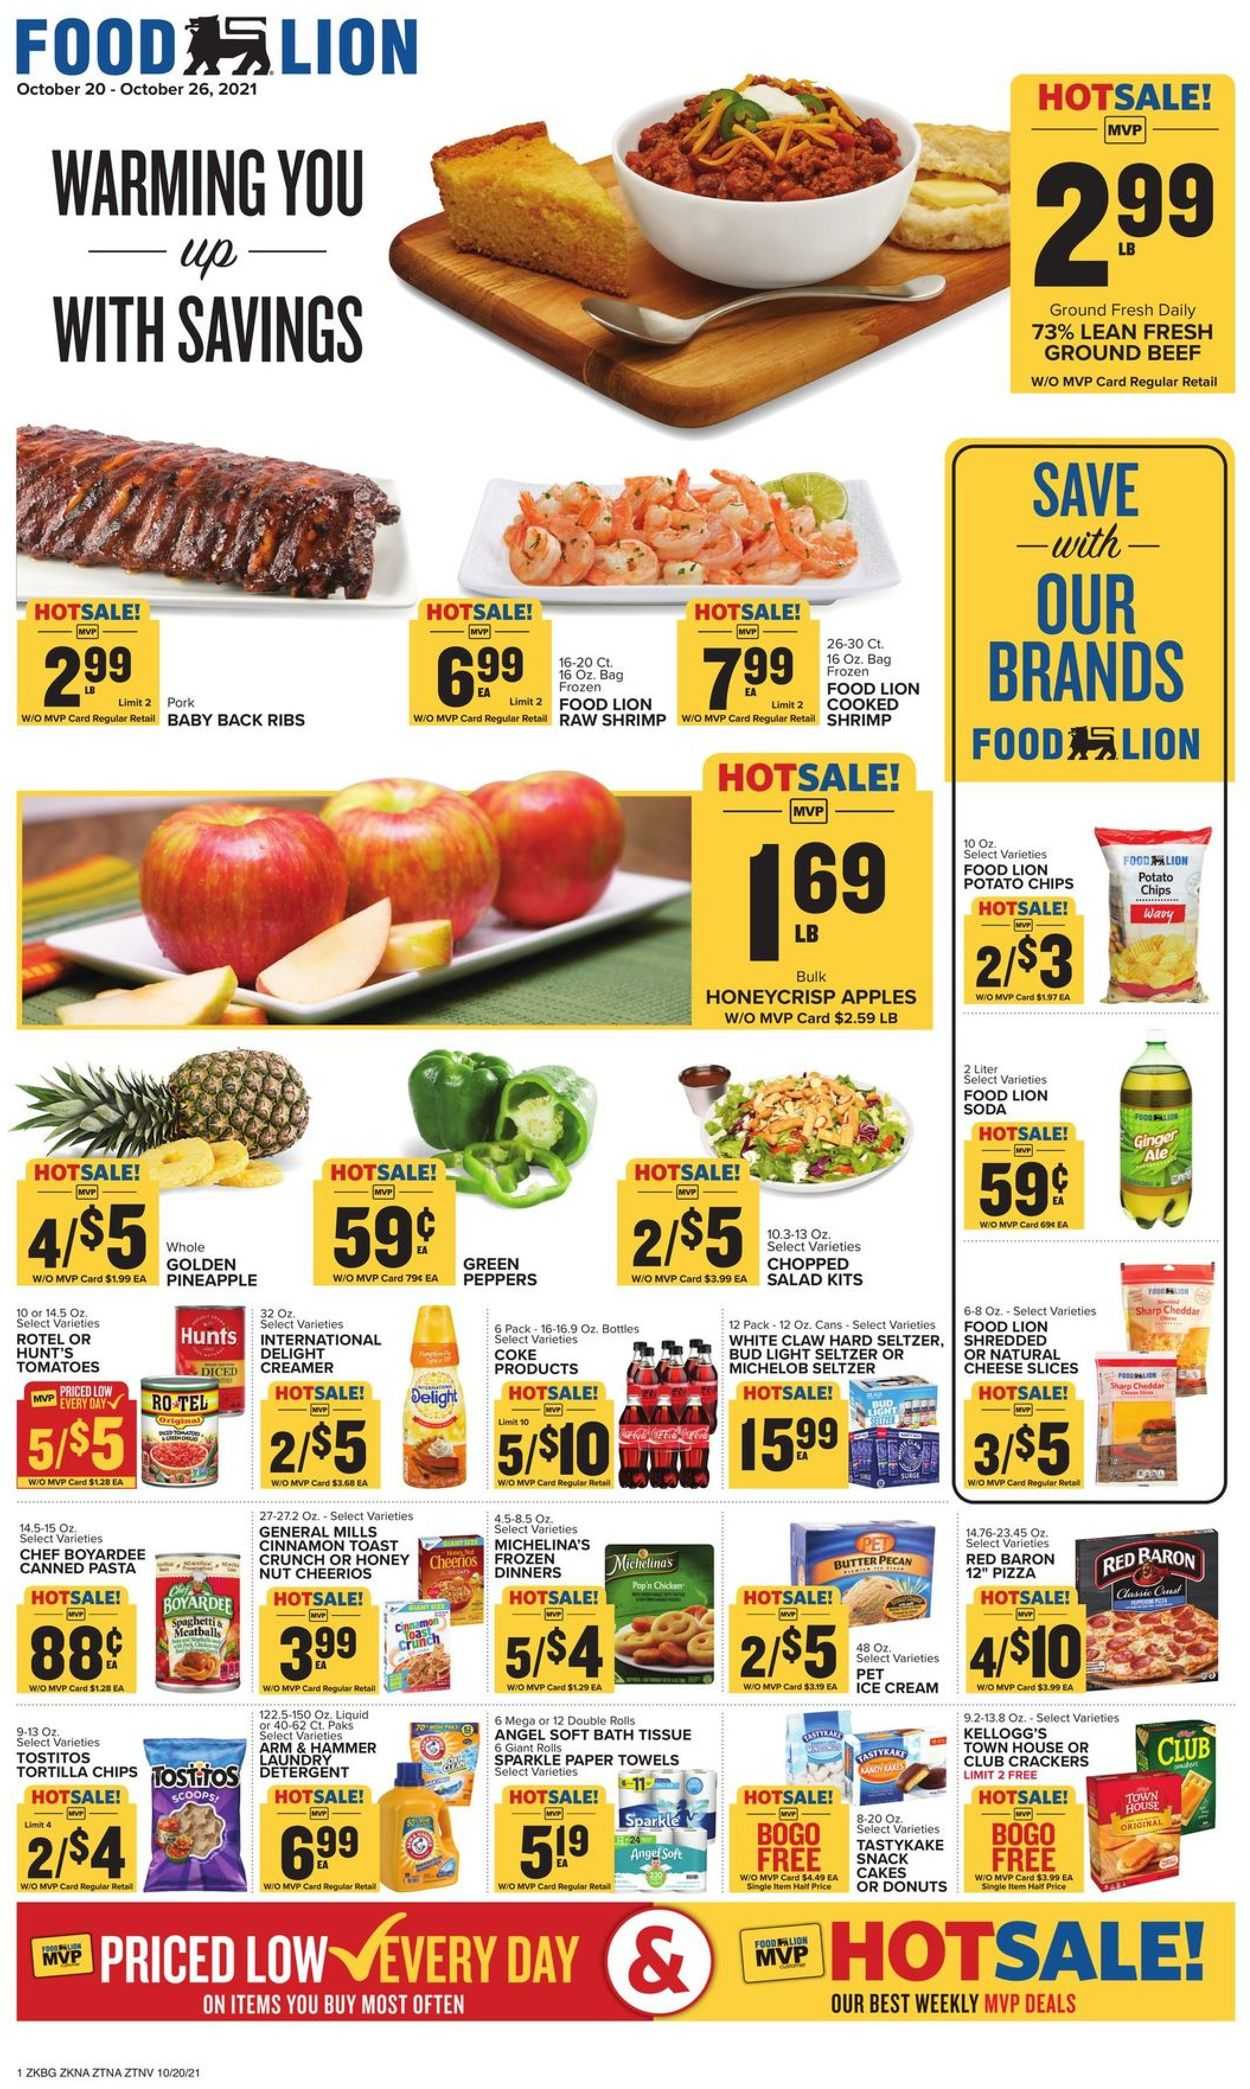 Food Lion Weekly Ad February 23 - March 1, 2022 Easy to Save